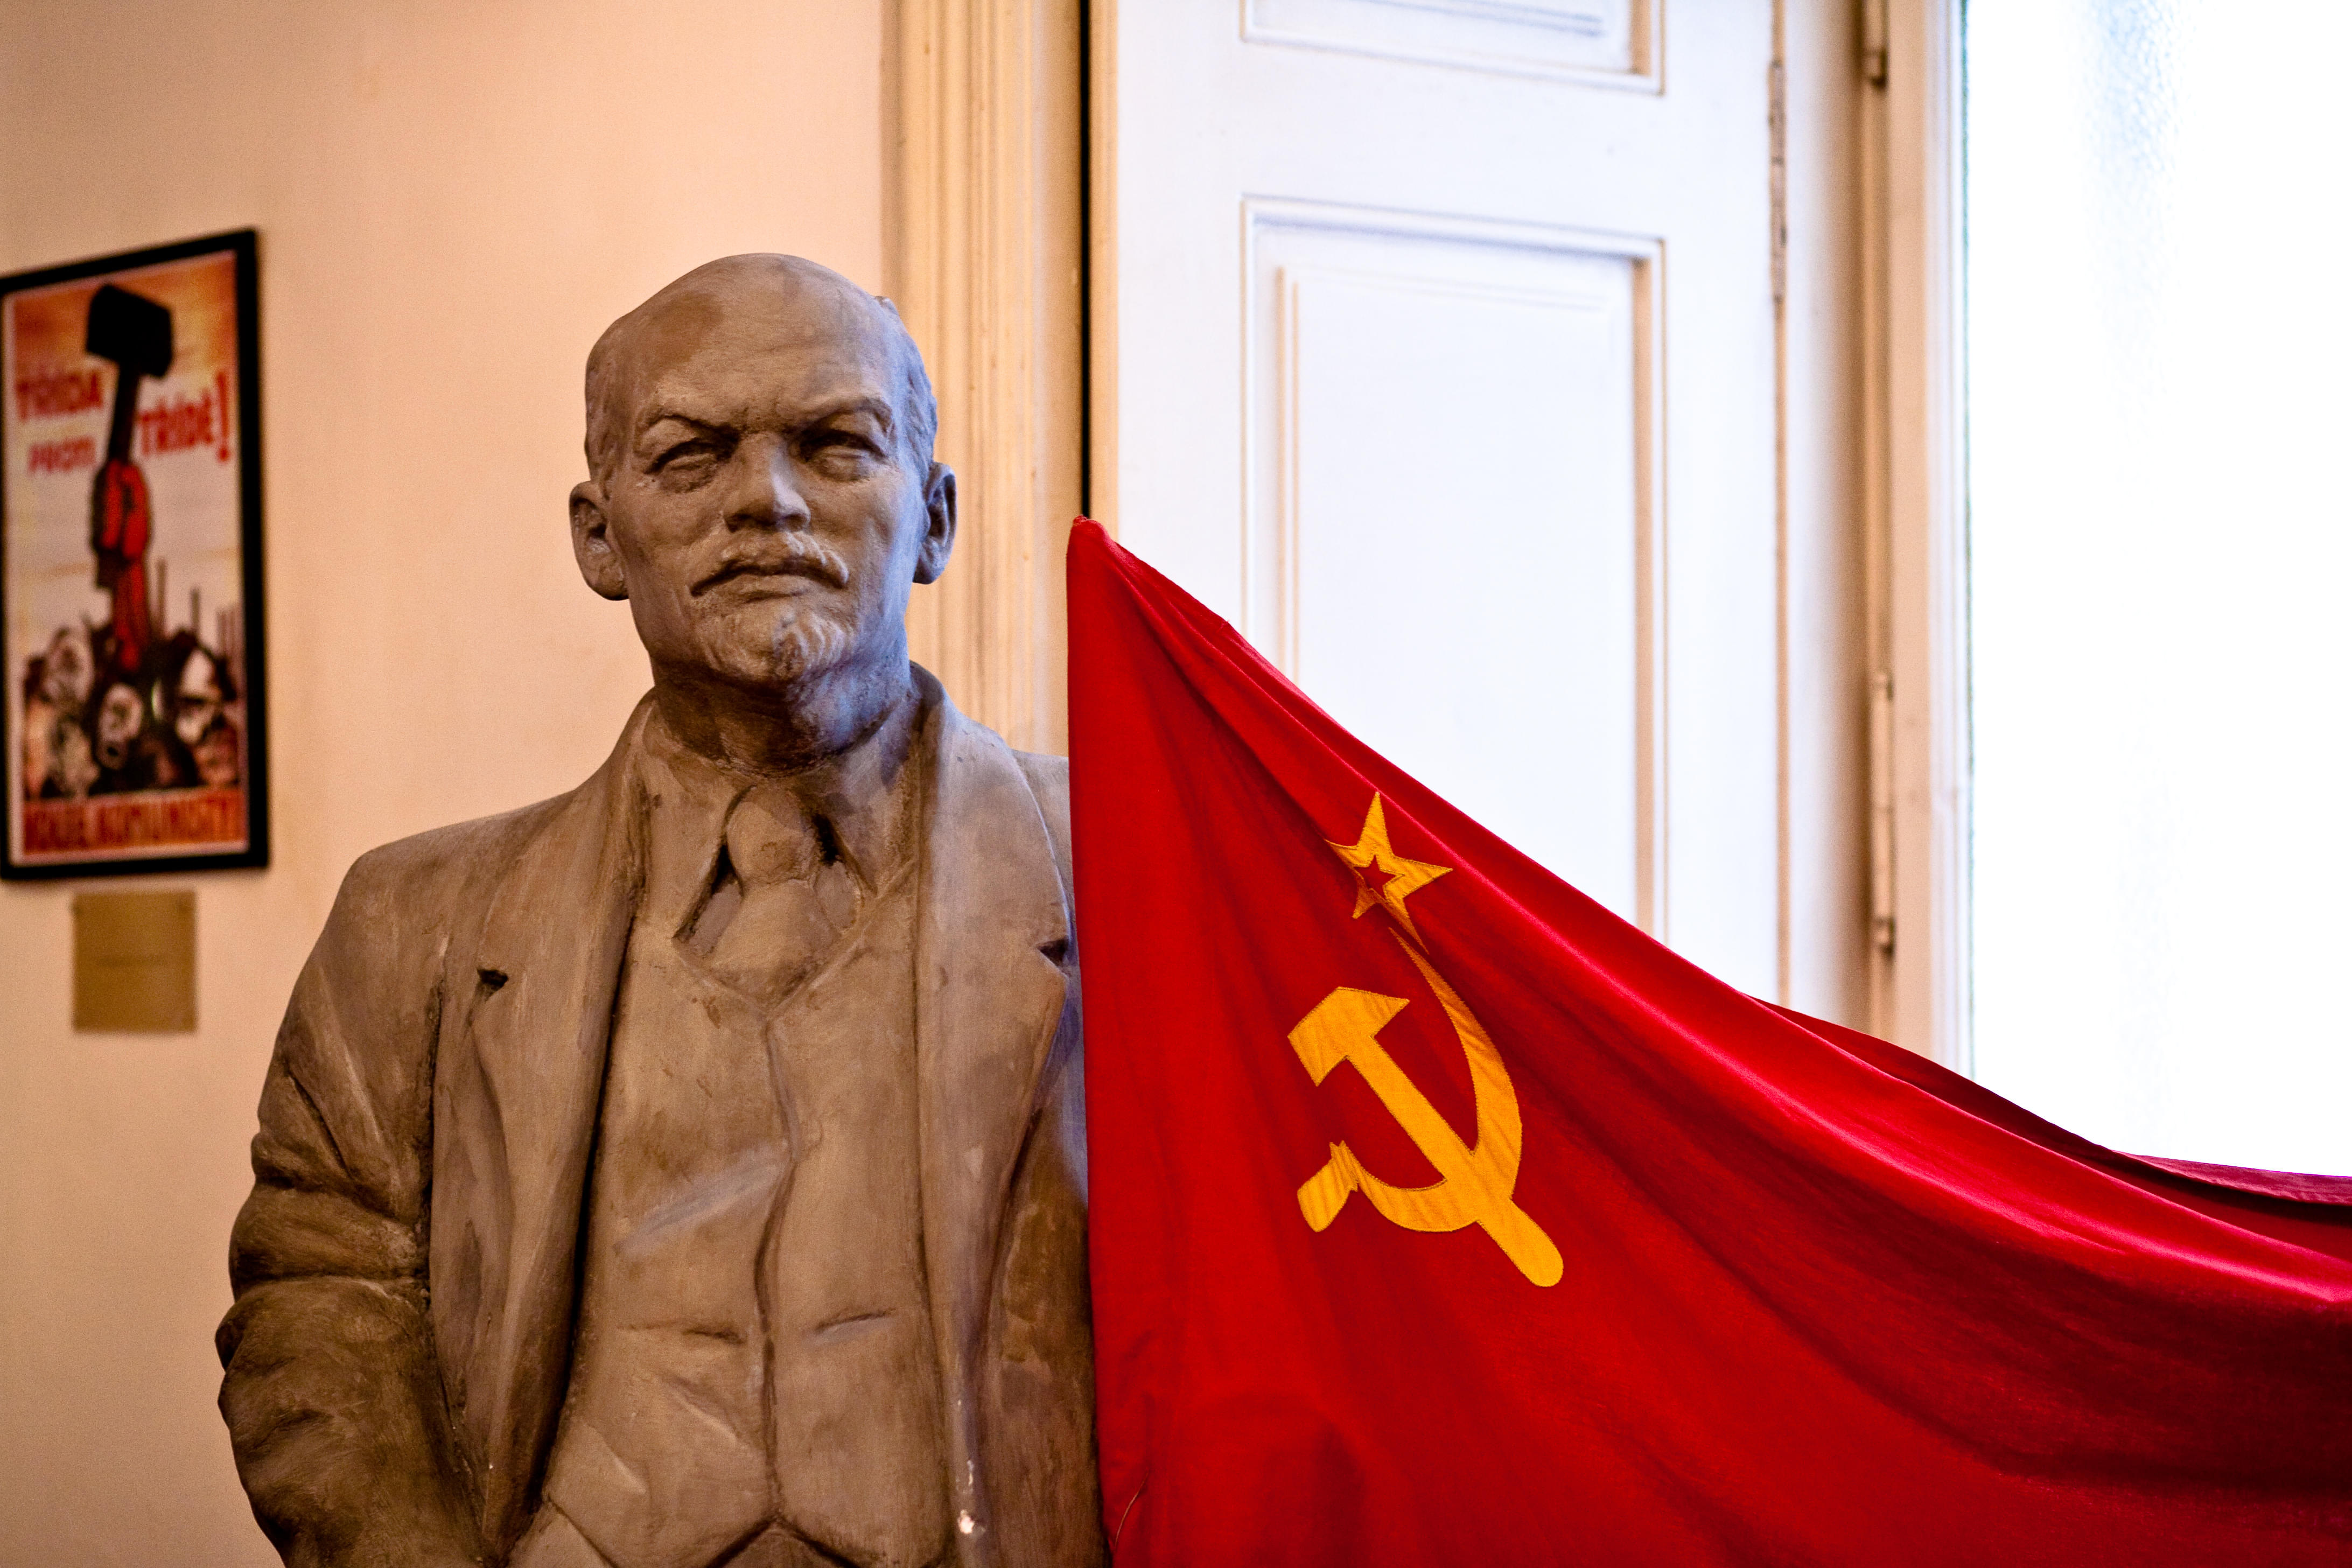 Visit the Museum of Communism and learn all about the communist era